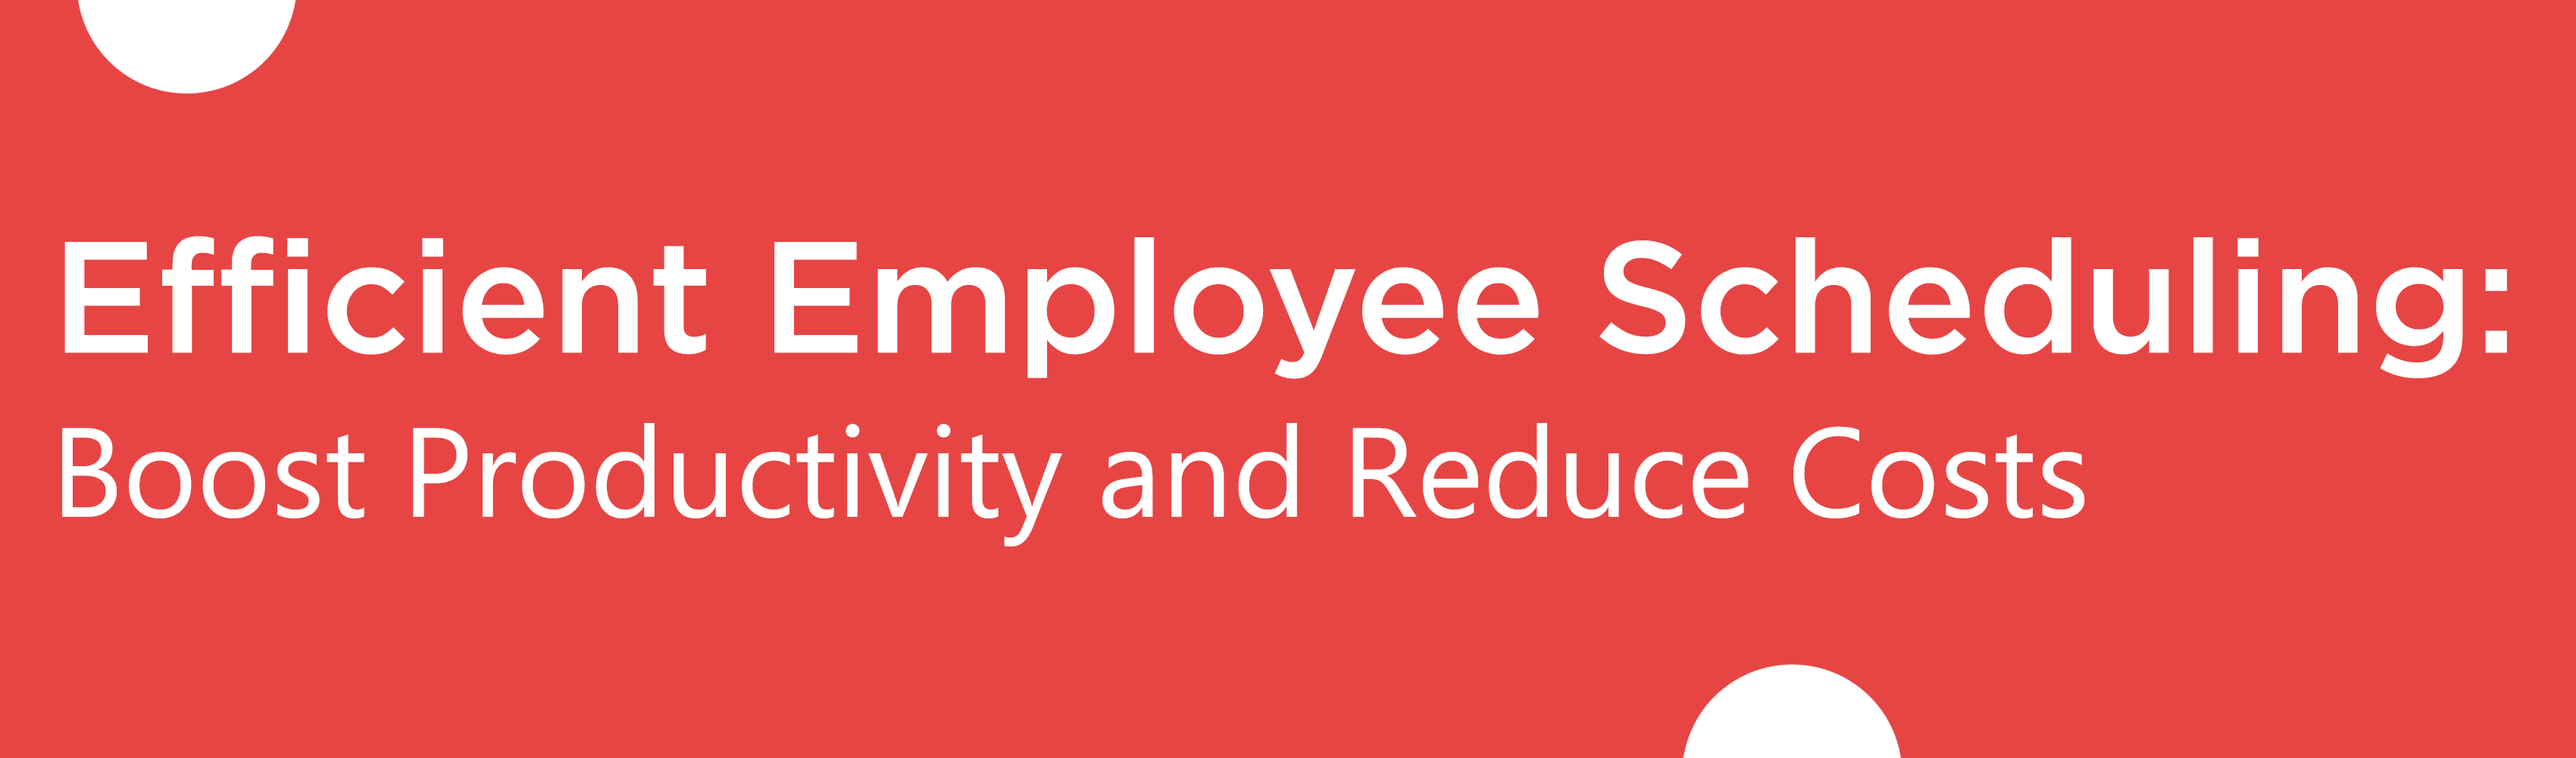 Efficient Employee Scheduling: Boost Productivity and Reduce Costs